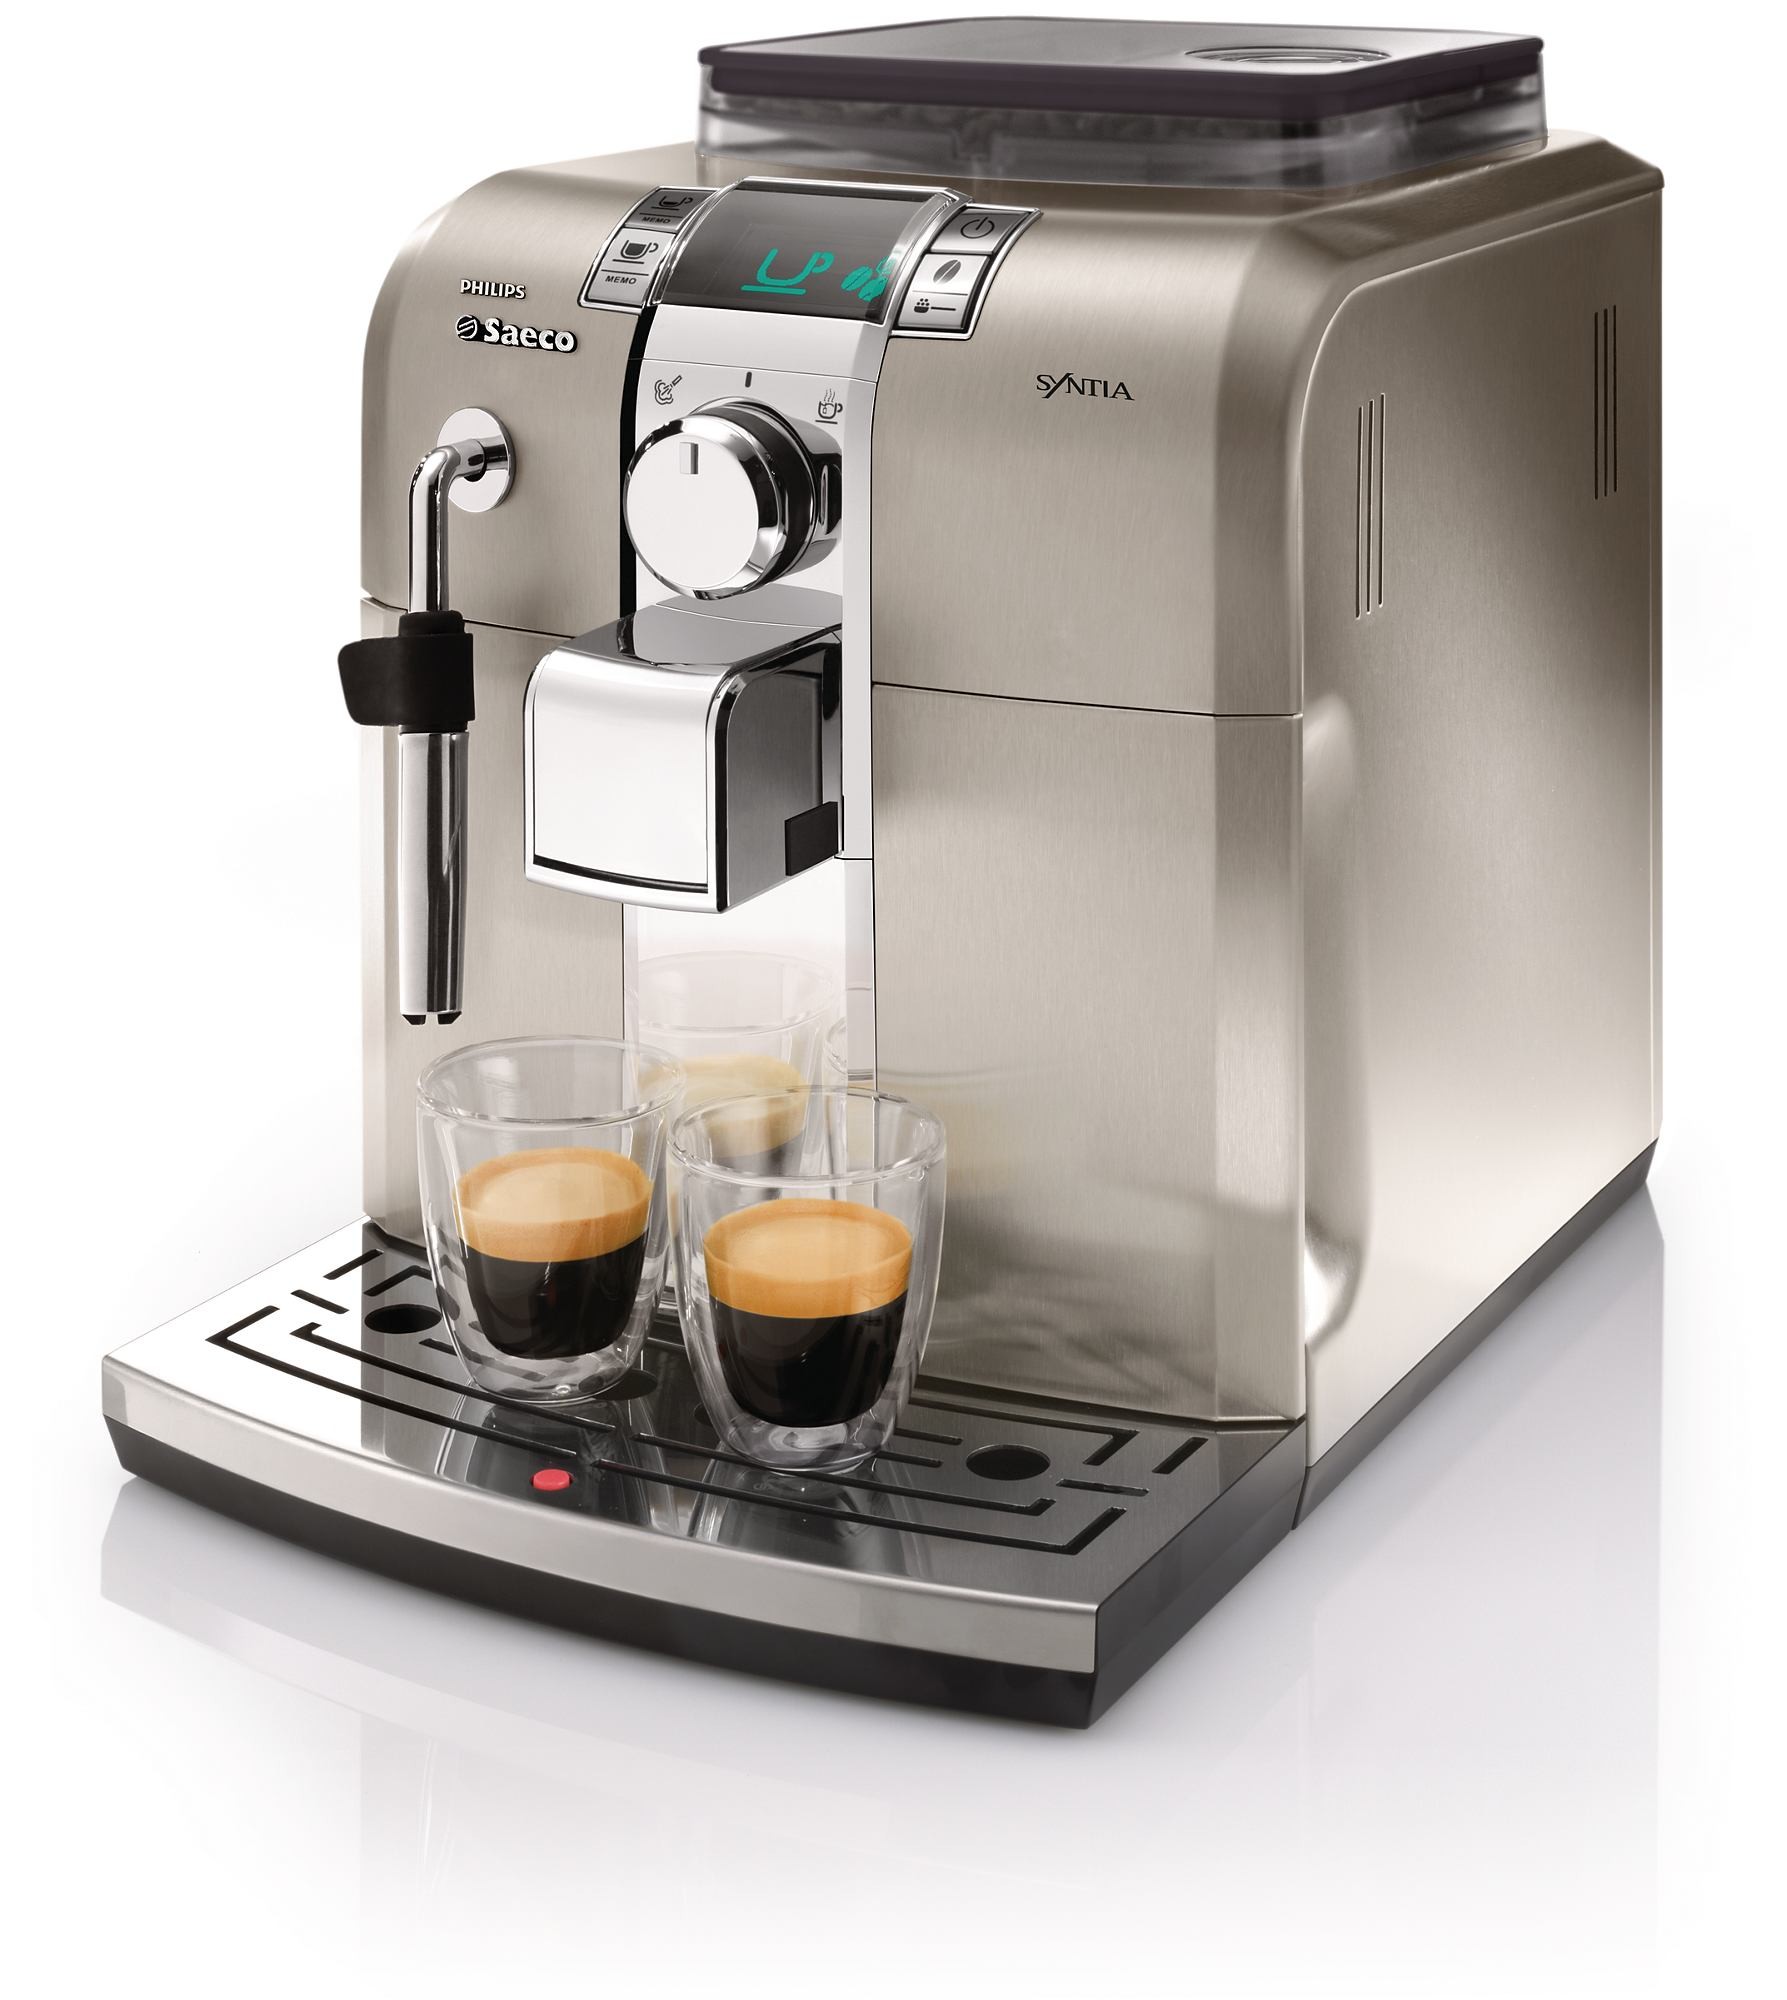 Saeco Syntia - Stainless Steel Super Automatic Espresso Maker